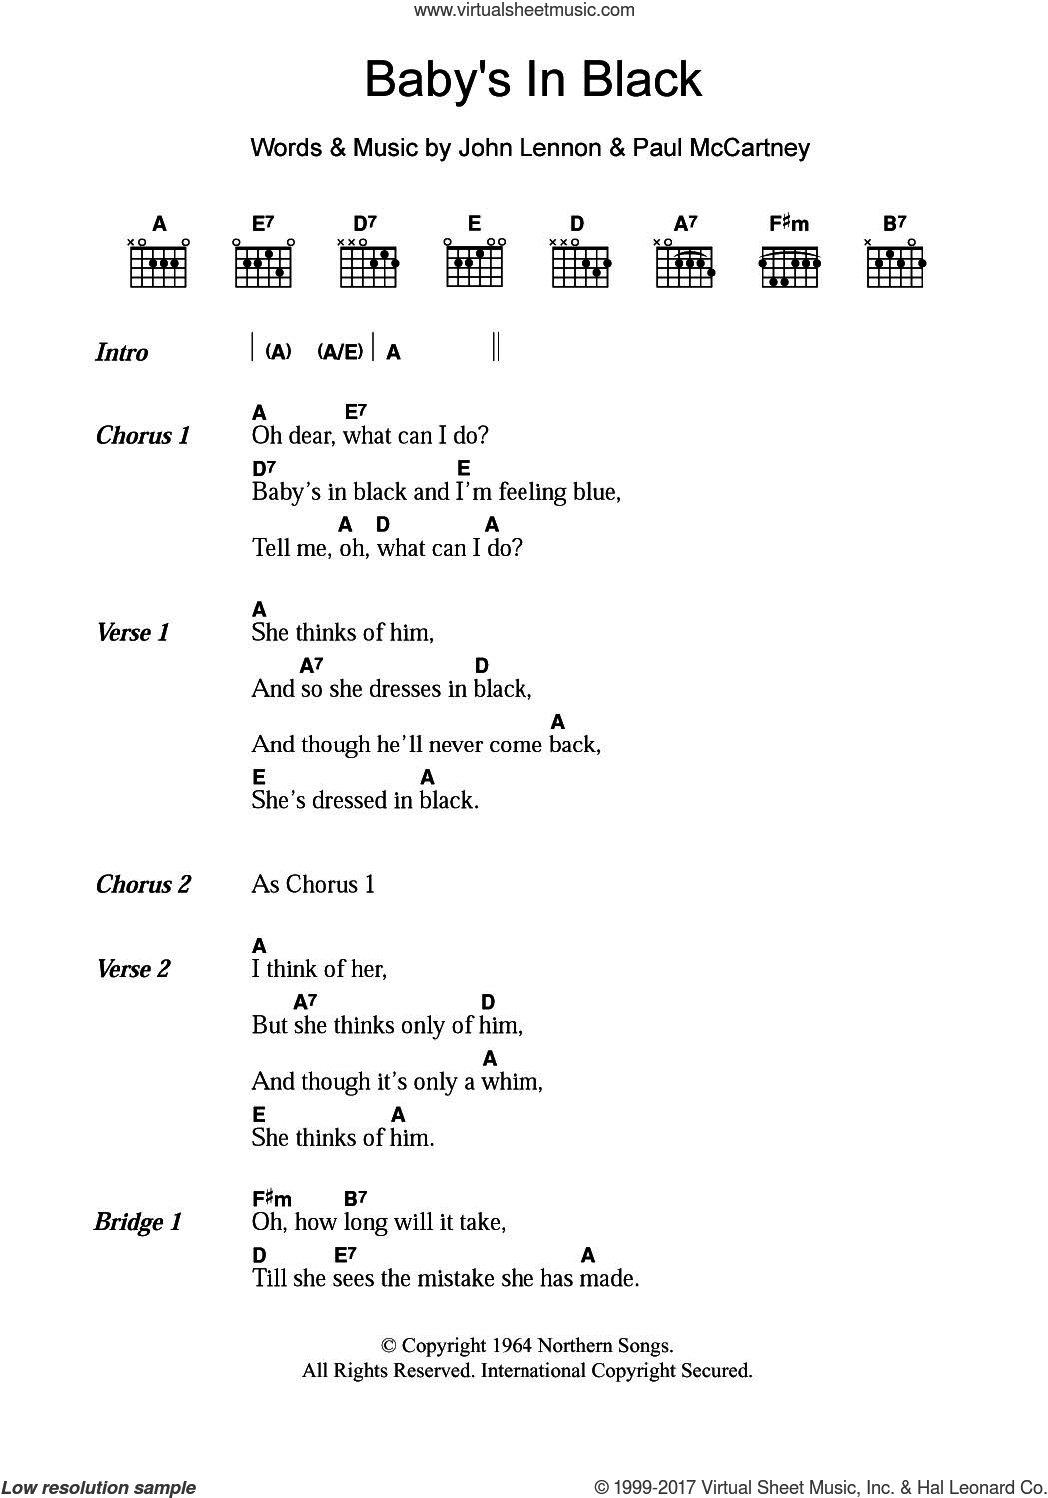 Across The Universe Chords Beatles Bas In Black Sheet Music For Guitar Chords Pdf